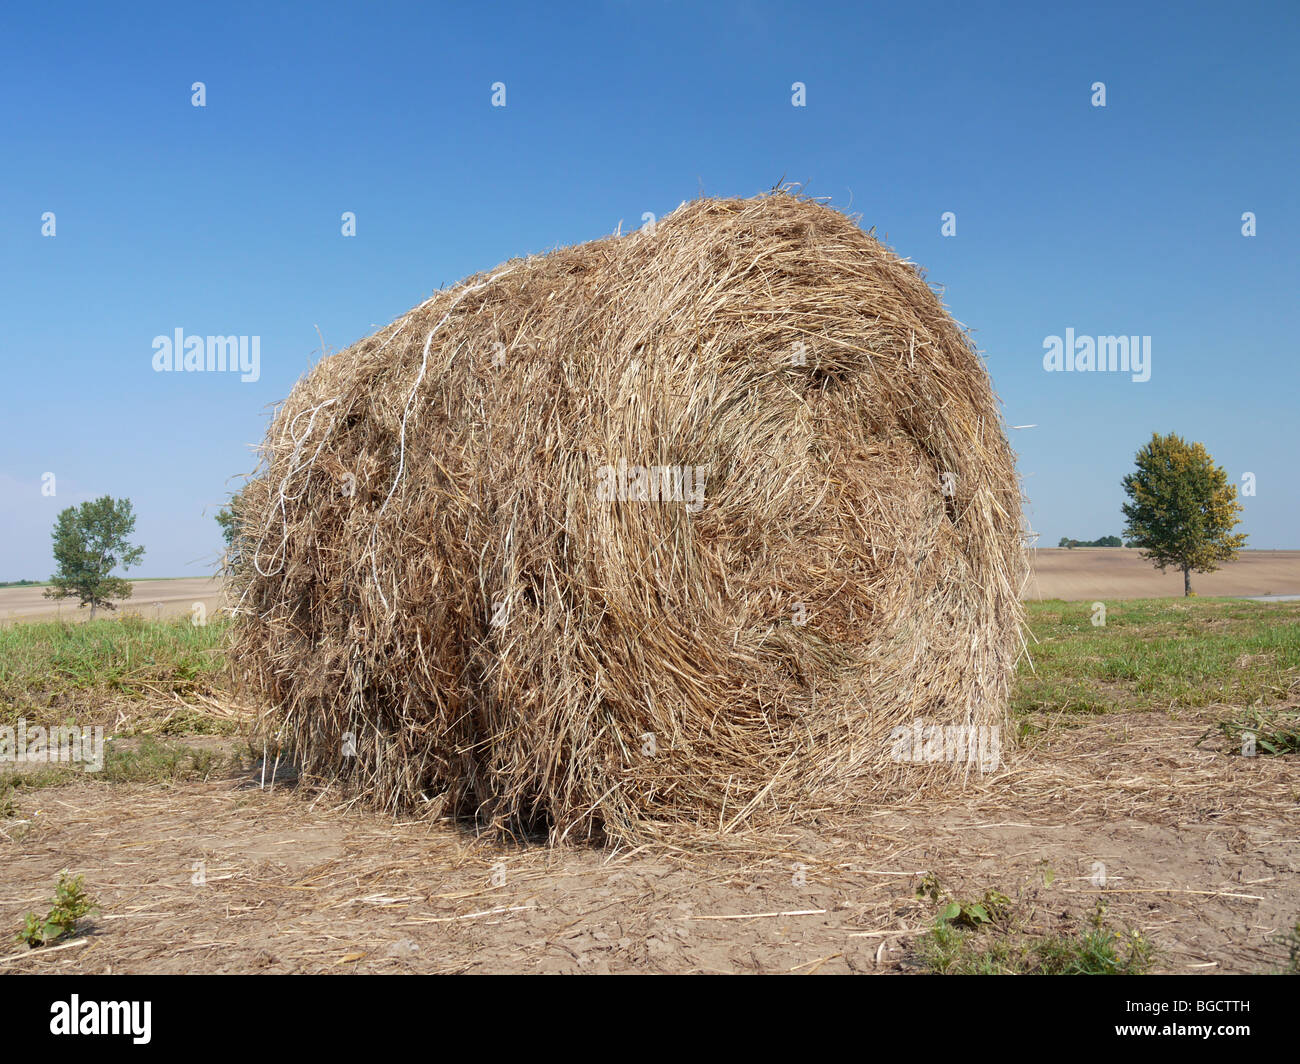 Hay bale drying on the arable field Stock Photo